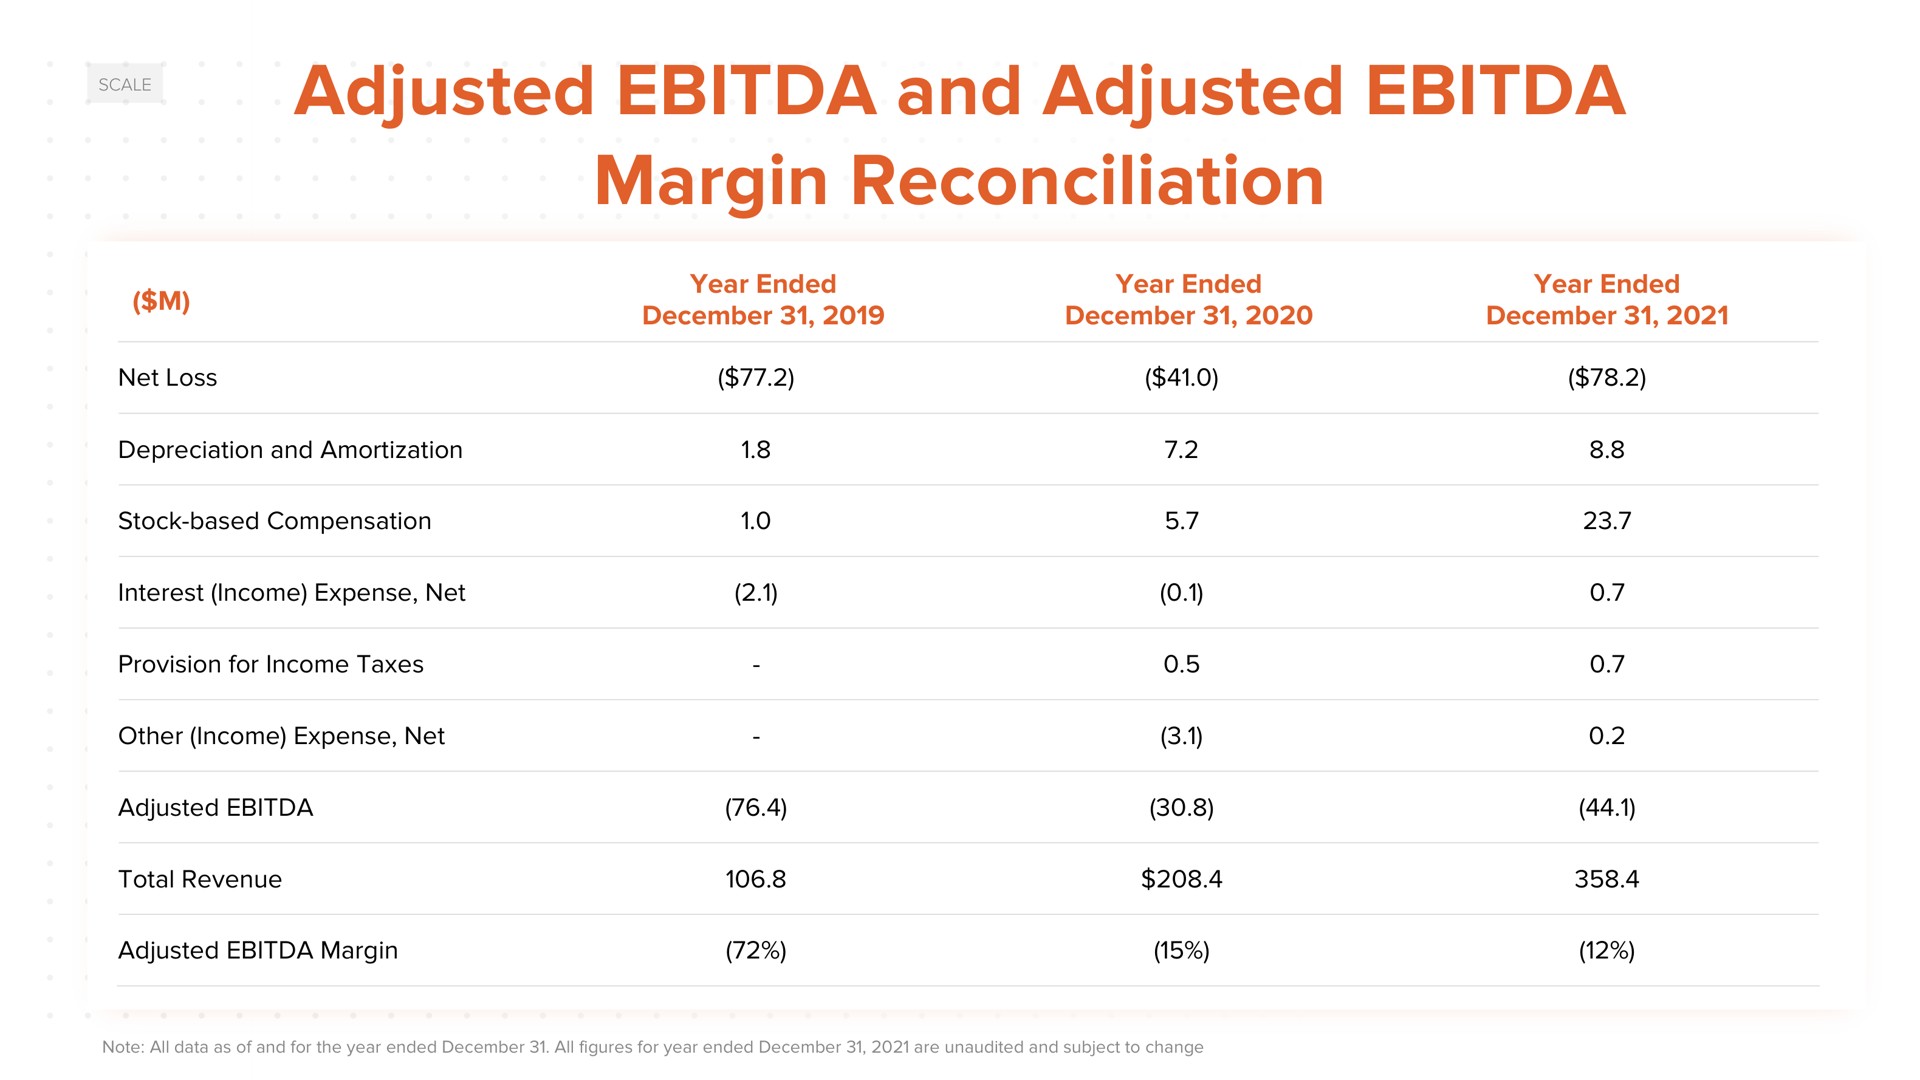 adjusted and adjusted margin reconciliation | ACV Auctions